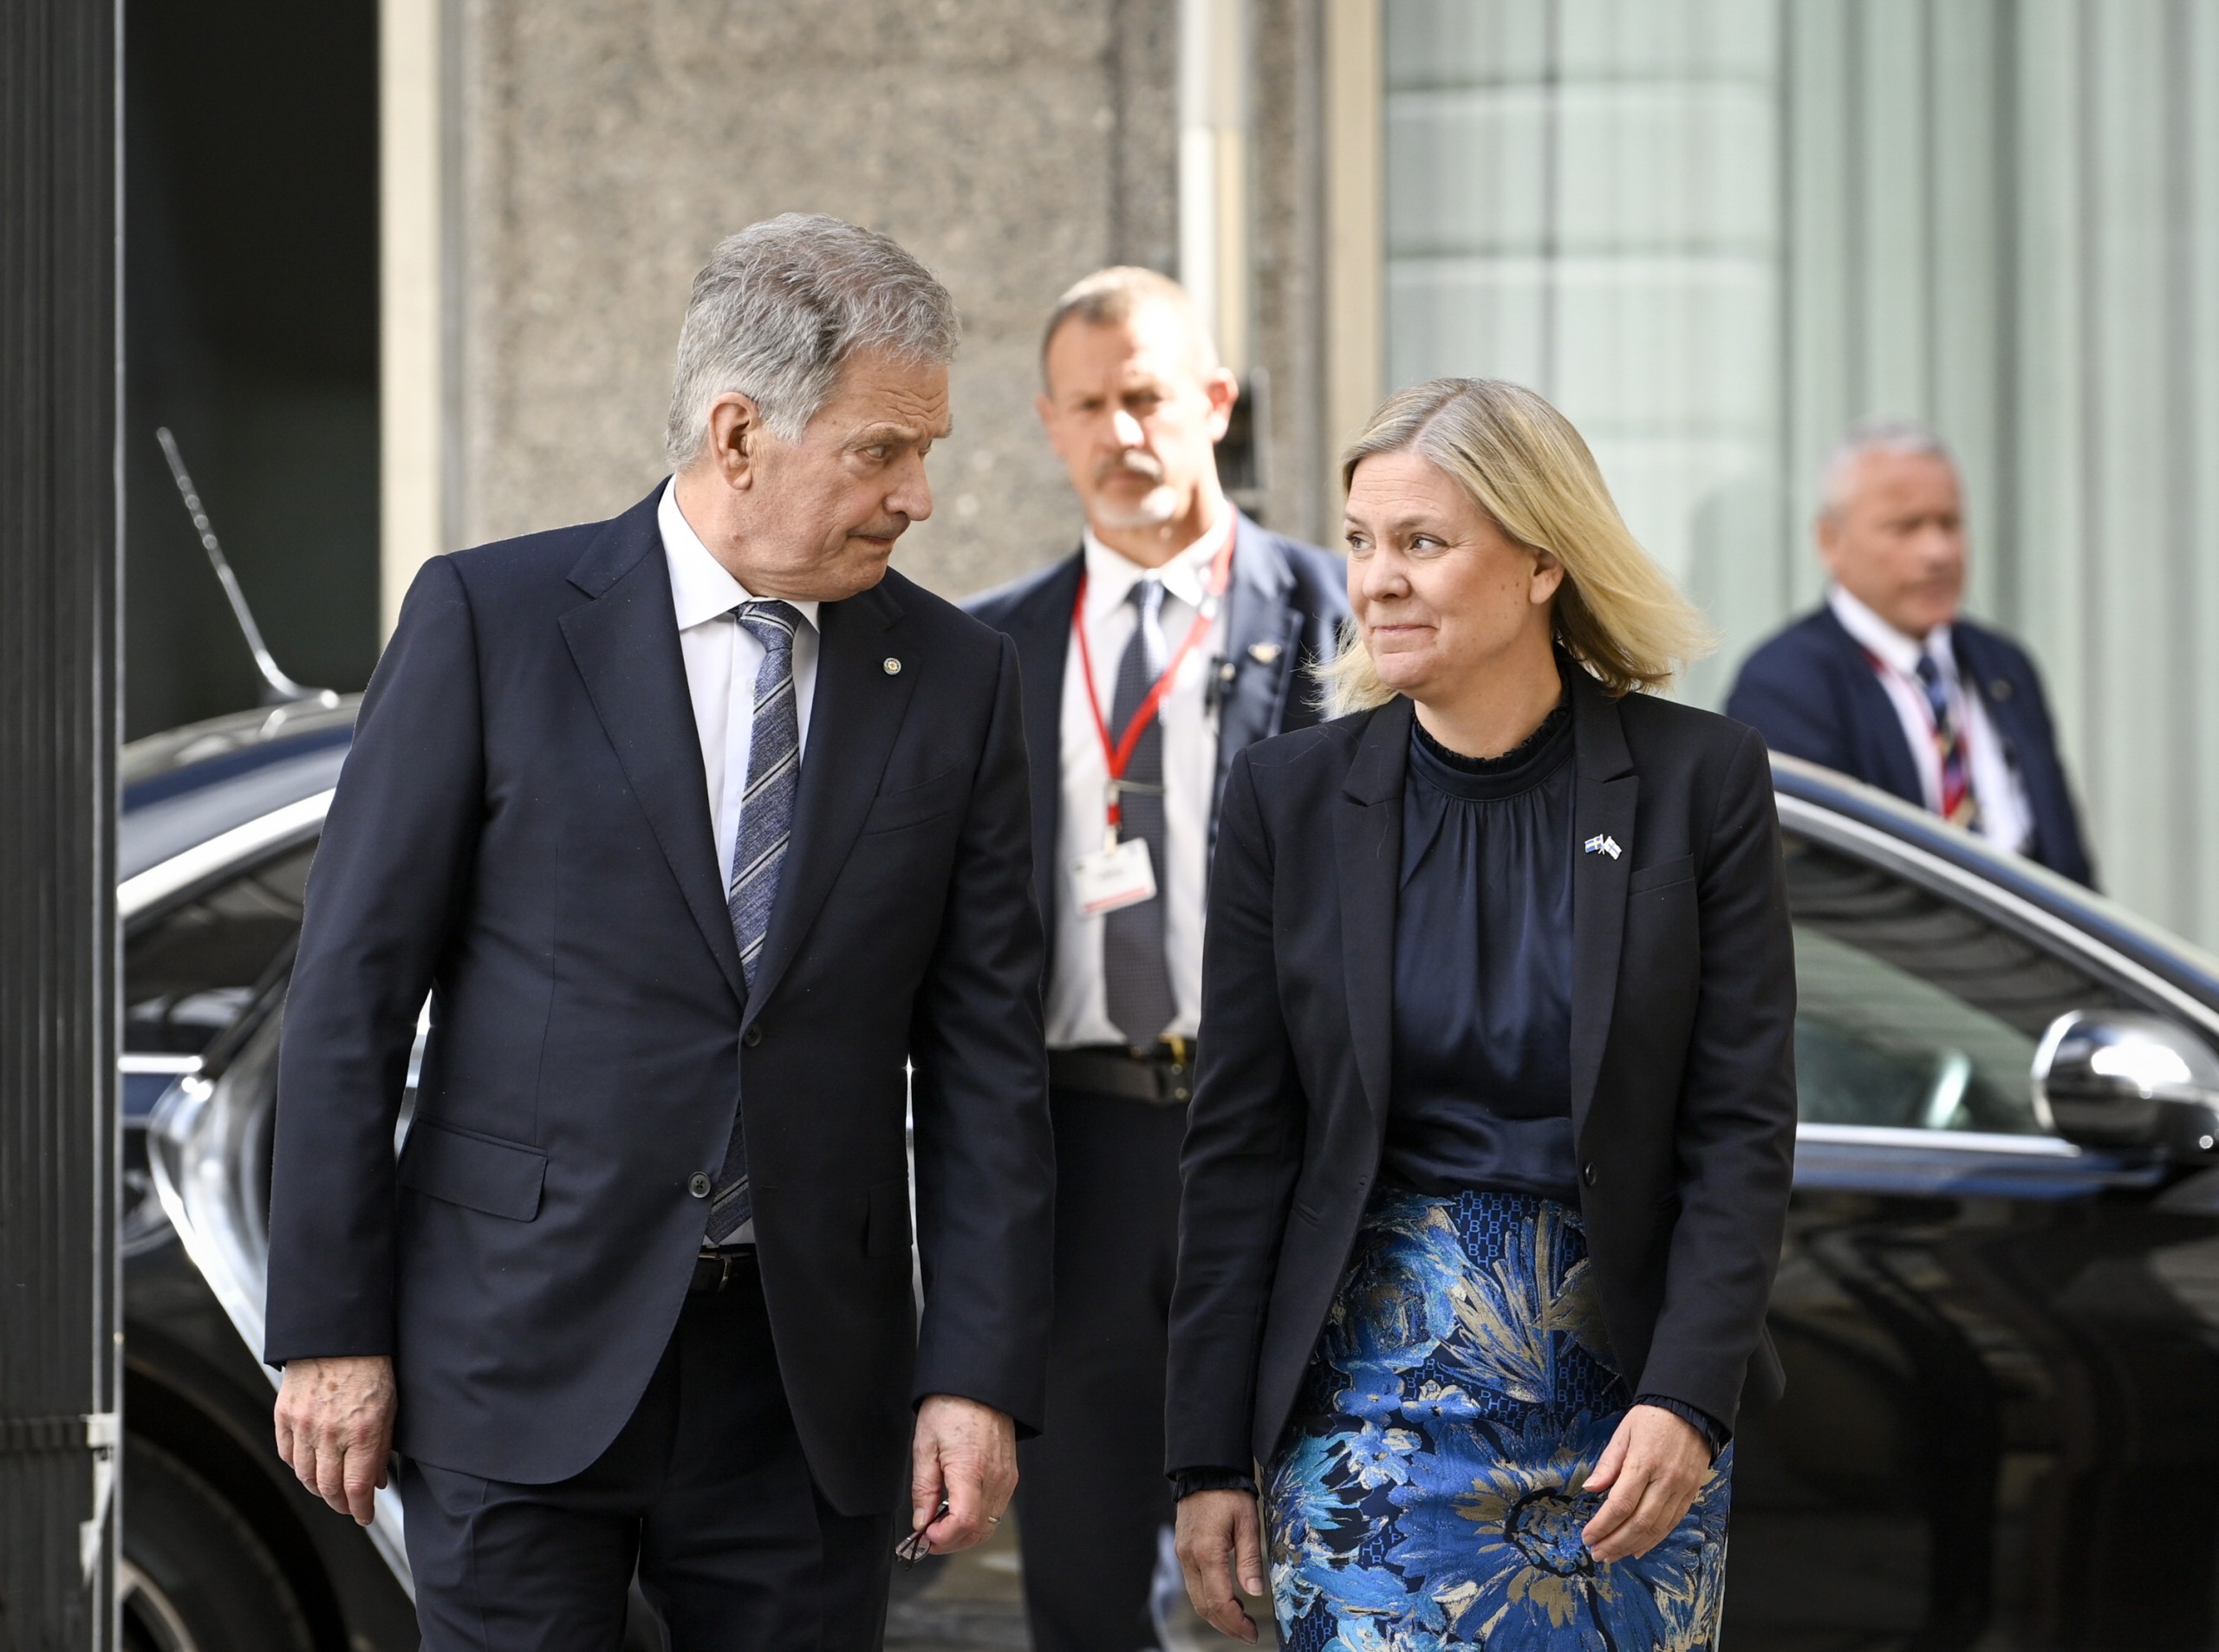 epa09952738 Finland's President Sauli Niinisto (L) is received by Sweden's Prime Minister Magdalena Andersson at the Adelcrantzska house in Stockholm, Sweden, 17 May 2022. Finland's President and his wife are in Sweden for a two-days state visit at the invitation of the King, as both countries have confirmed their application for NATO membership.  EPA/Anders Wiklund  SWEDEN OUT